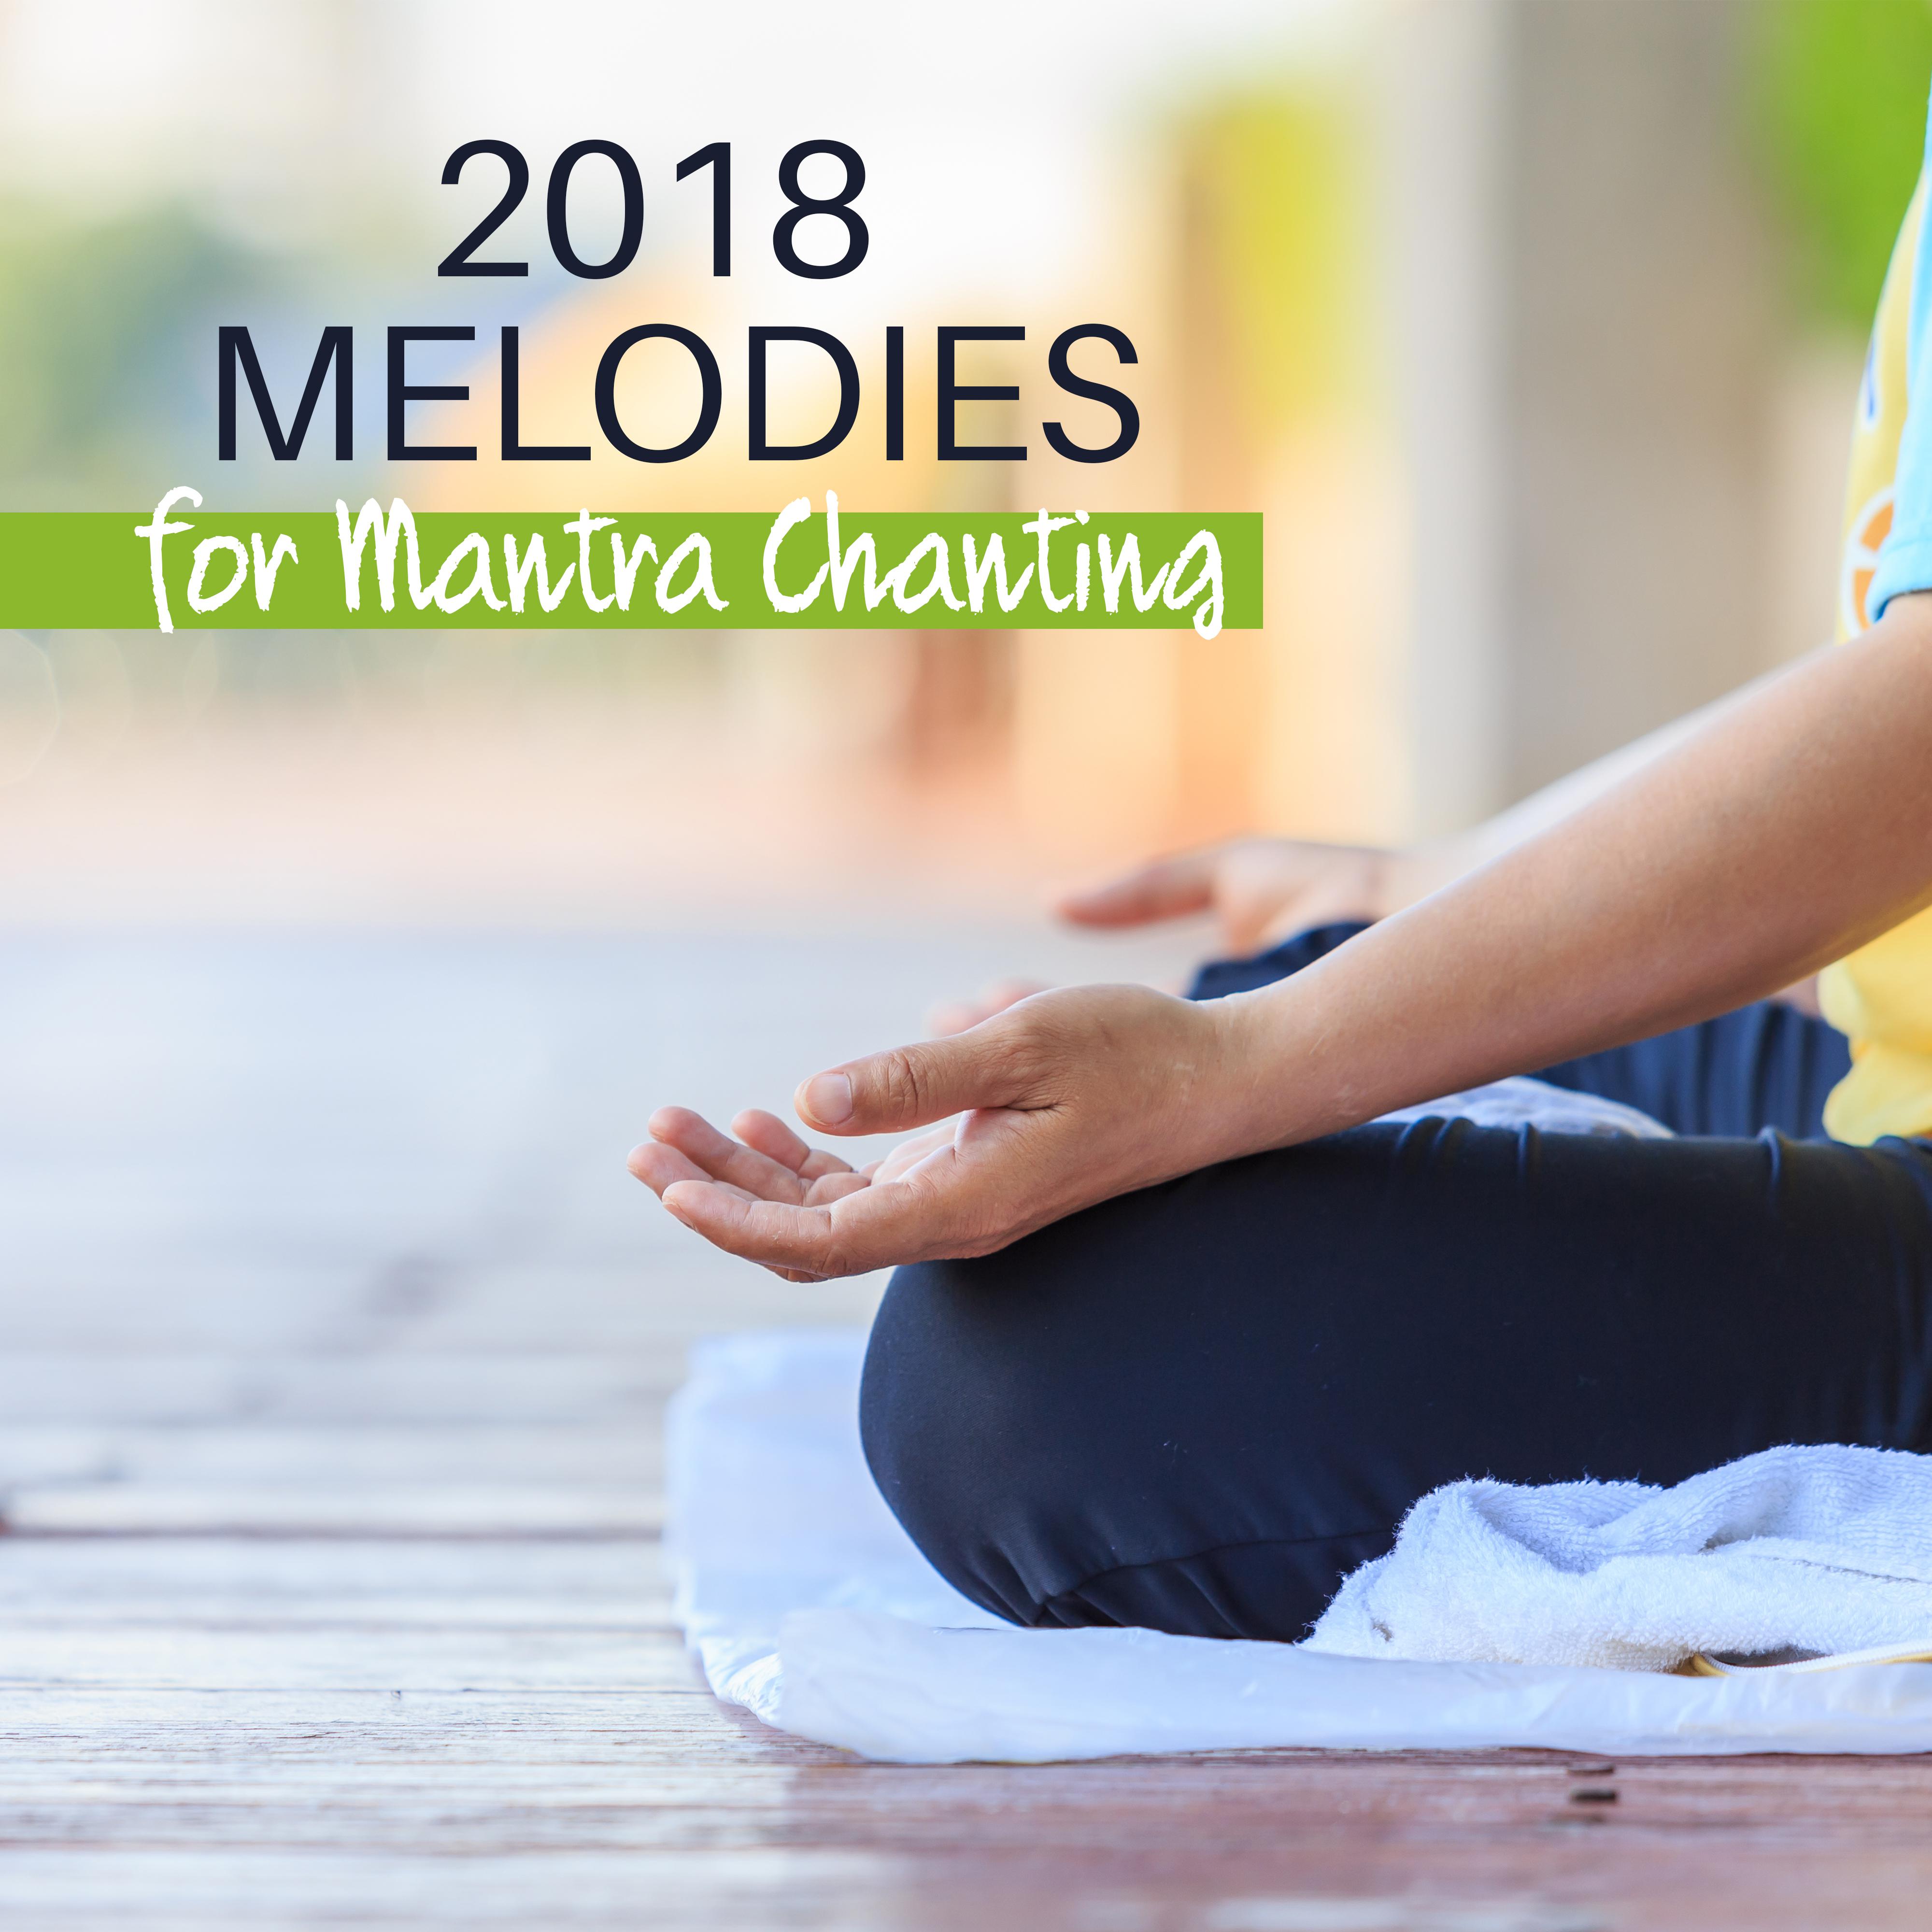 2018 Melodies for Mantra Chanting